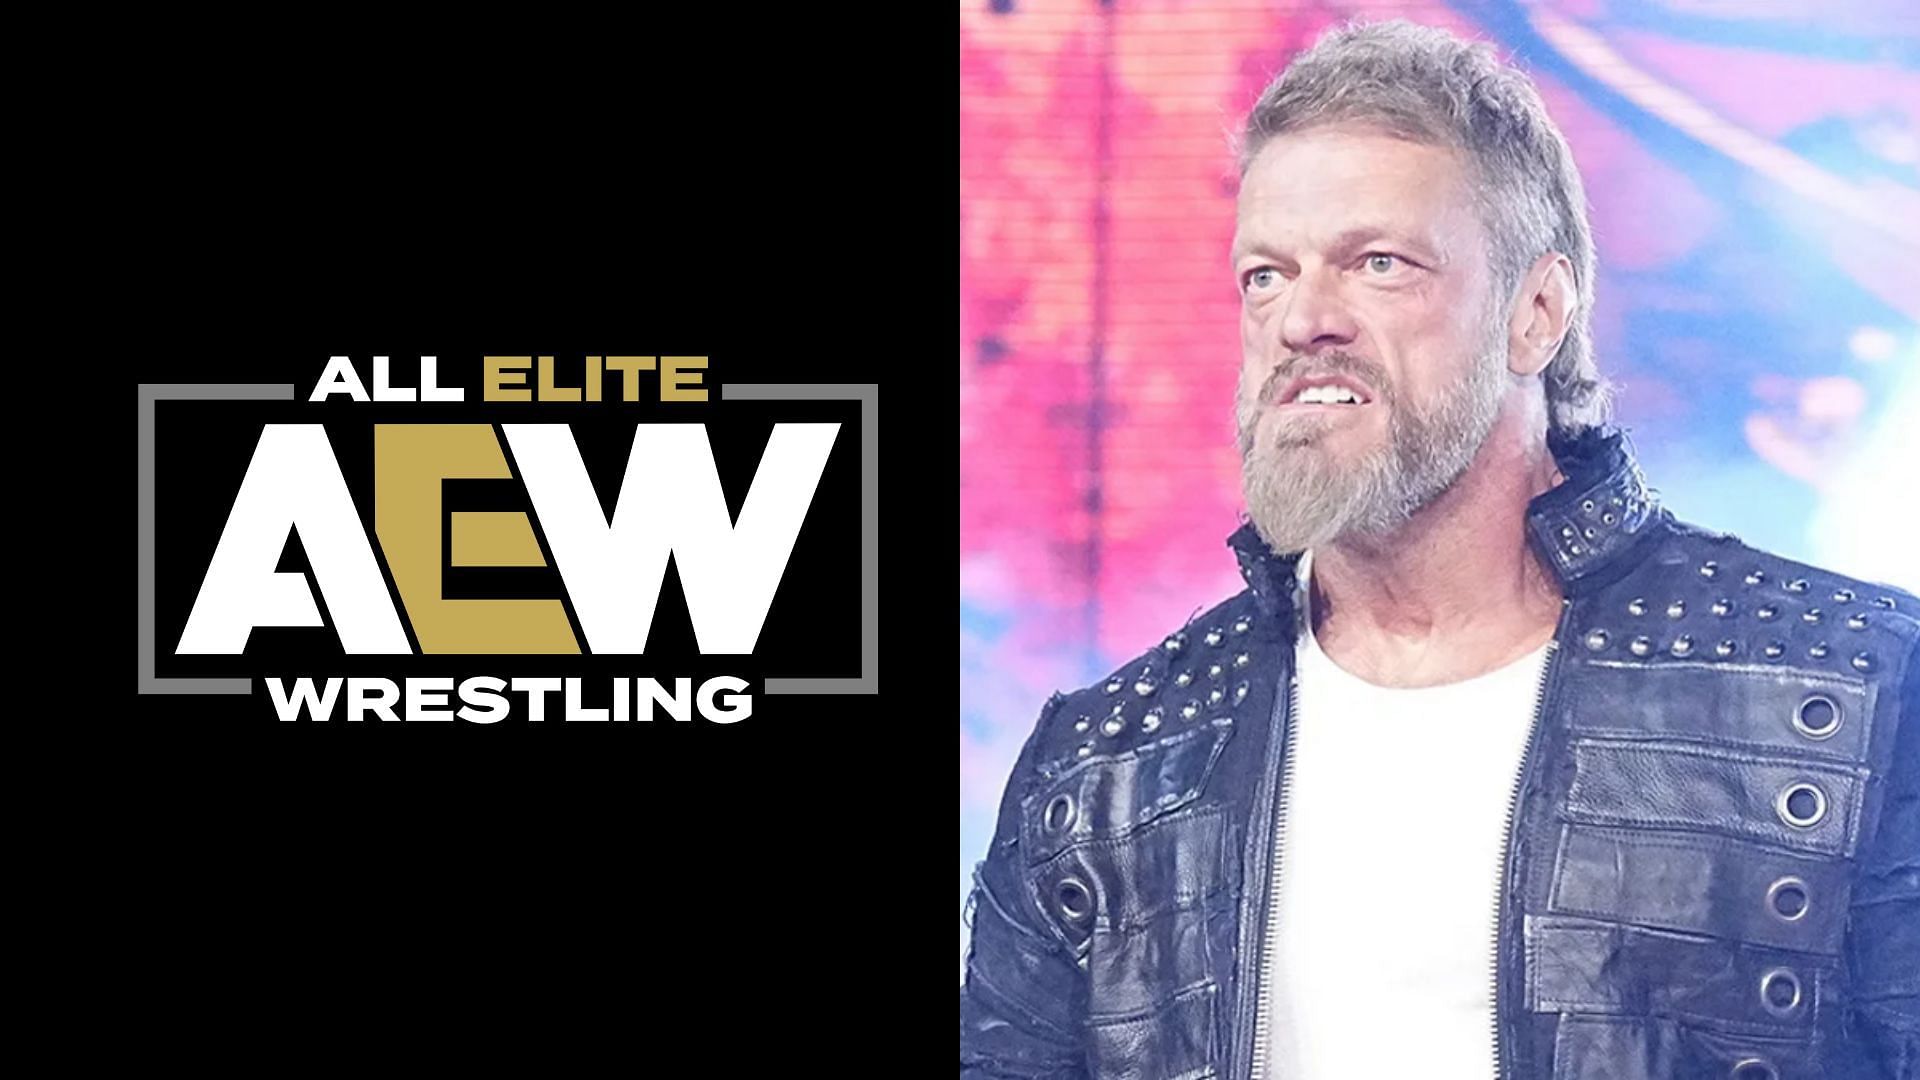 Adam Copeland made his AEW debut at WrestleDream this past week